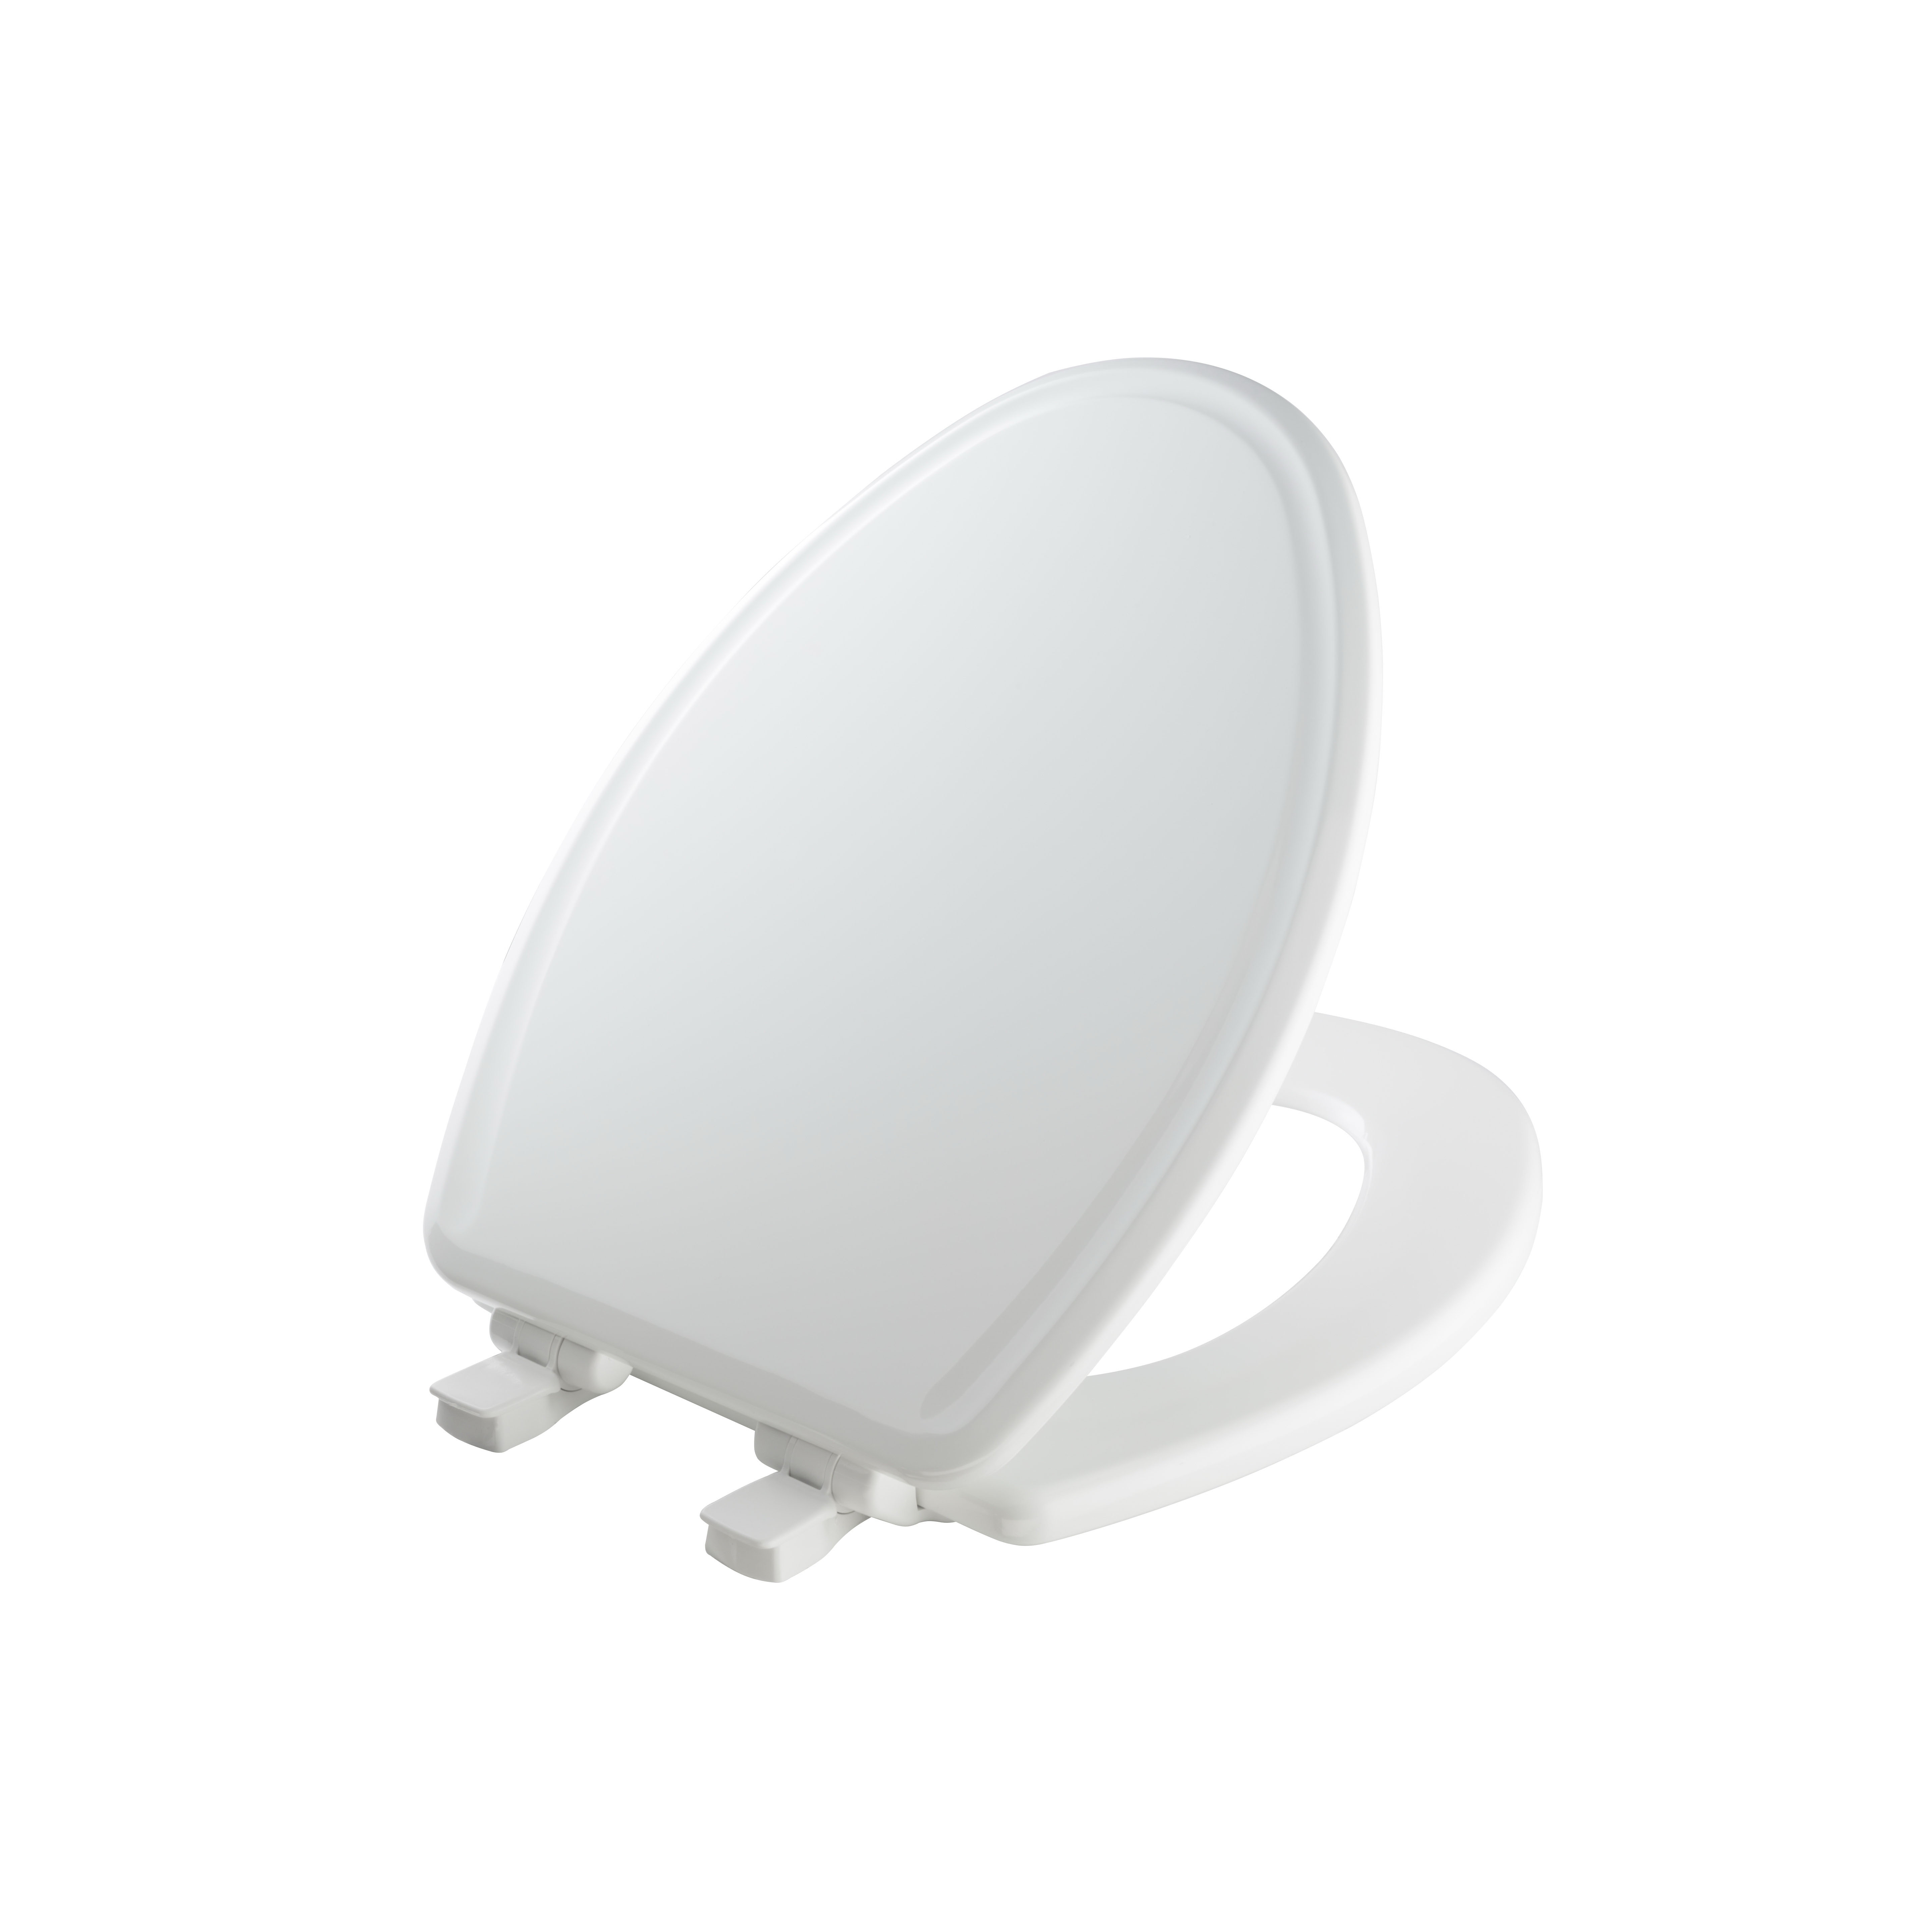 Mayfair 148SLOW-000 Toilet Seat with Cover, Elongated, Molded Wood, White, STA-TITE, Whisper Close Hinge